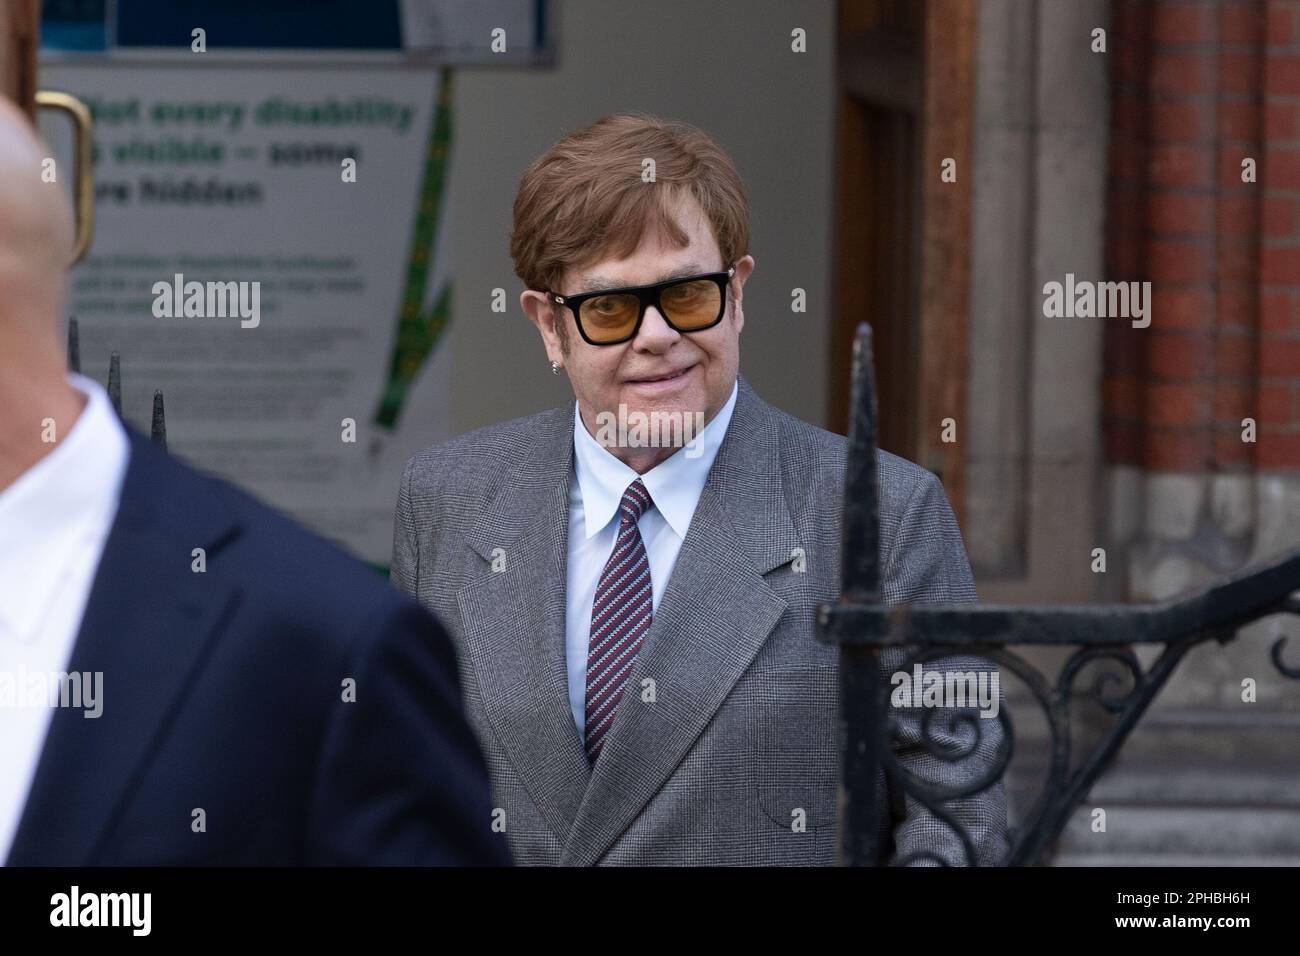 London, UK. 27th Mar, 2023. 27th March 2023, London, Sir Elton John leaves the Royal Courts of Justice, Britain's High Court in London, after a hearing claim over allegations of unlawful information gathering brought against publisher Associated Newspaper Limited (ANL). Sir Elton John is sueing ANL alongside Prince Harry, David Furnish, Liz Hurley, Sadie Frost, Former Liberal Democrat MP Sir Simon Hughes and Baroness Doreen Lawerence. Credit: Lucy North/Alamy Live News Stock Photo